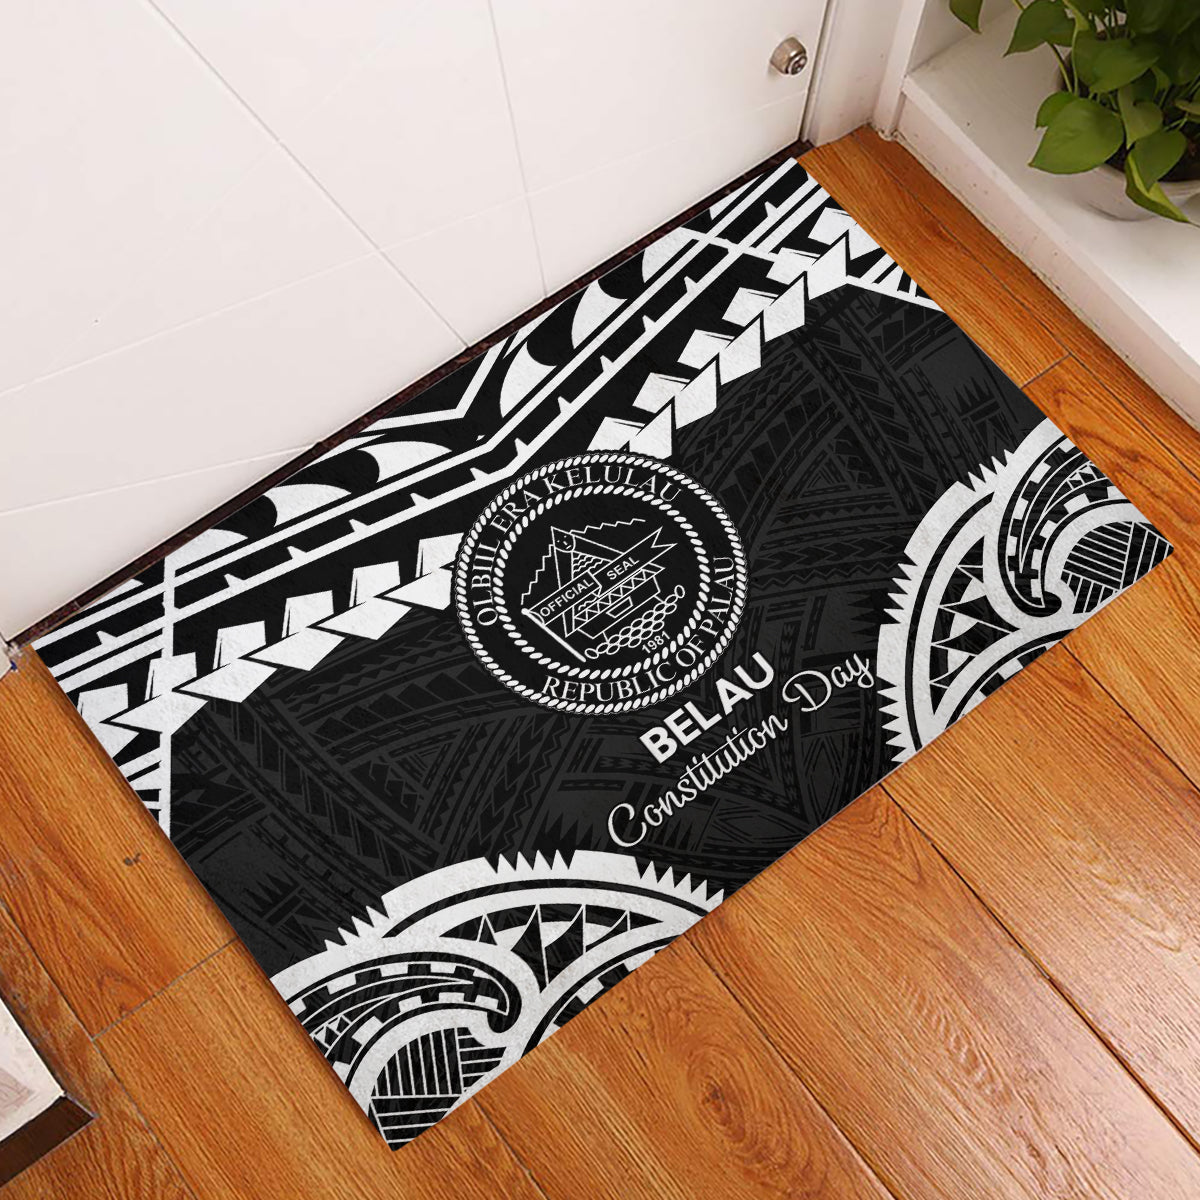 Palau Constitution Day Rubber Doormat Belau Seal With Polynesian Pattern - Black